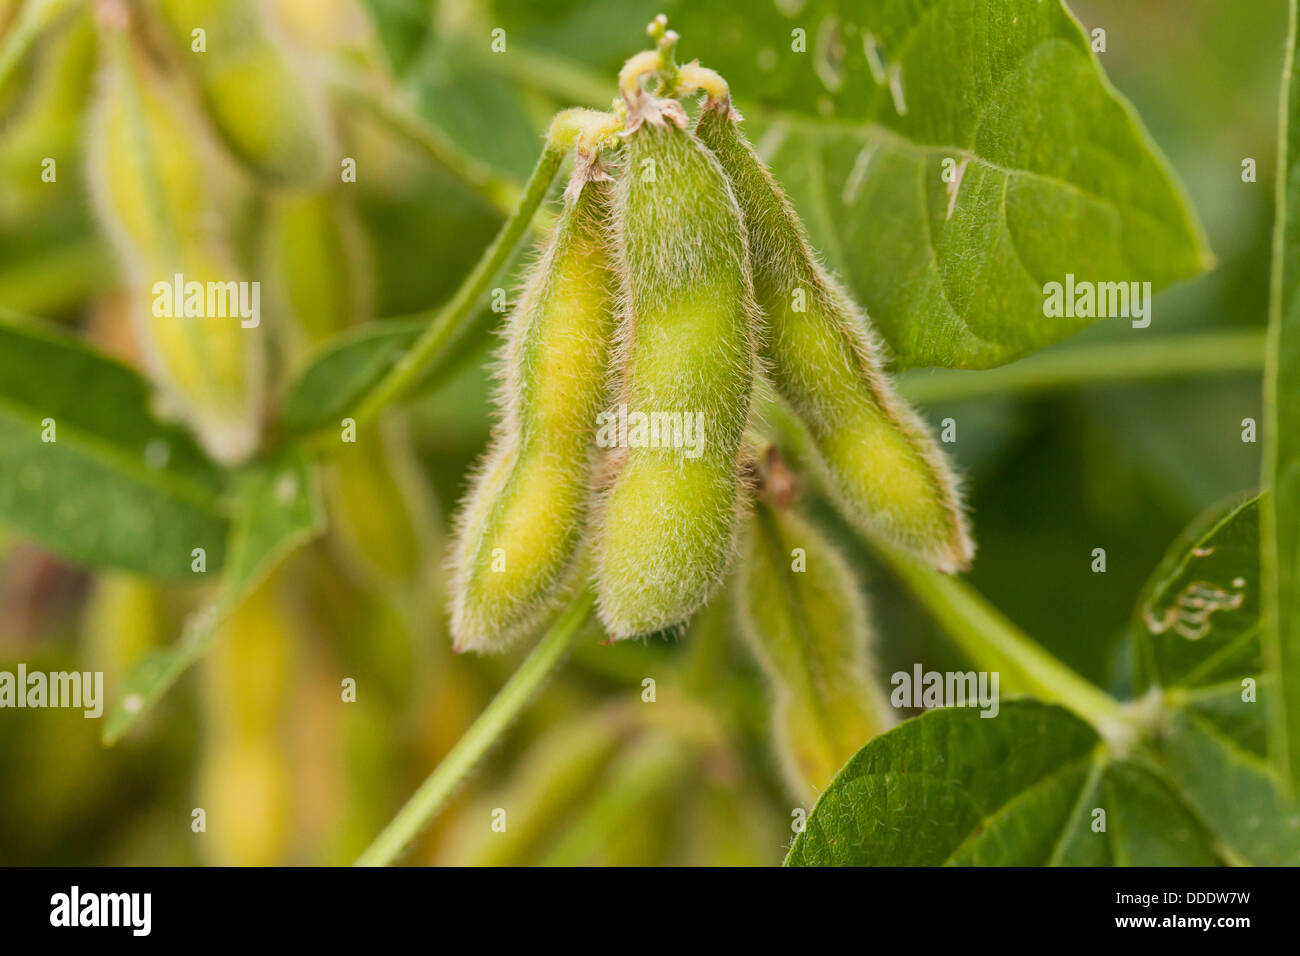 Soybean pods on branch (Glycine max) Stock Photo